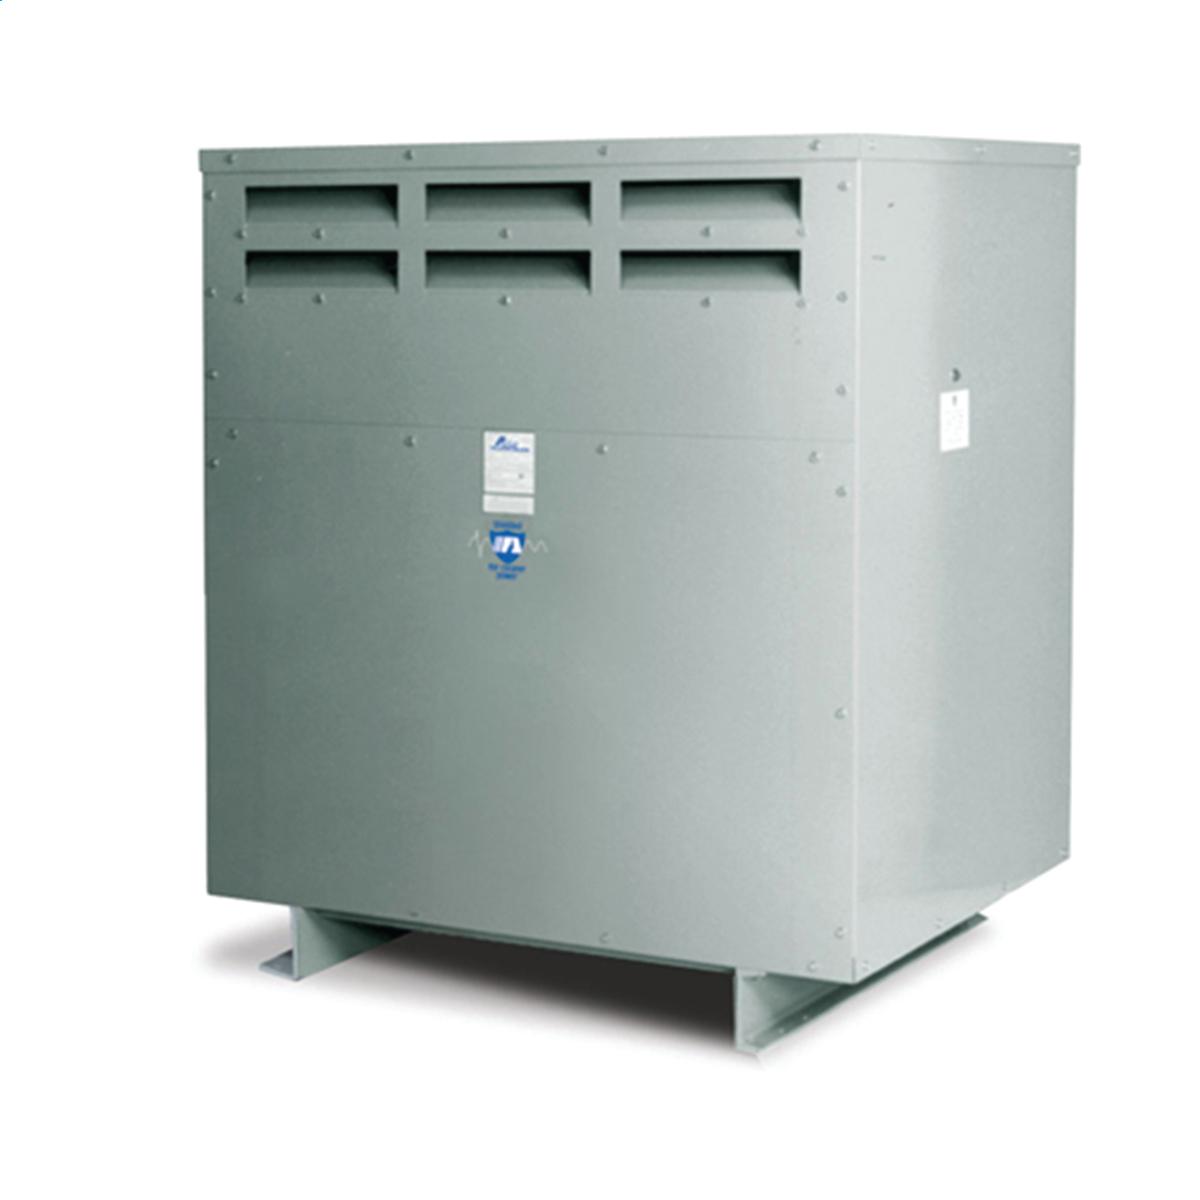 Hubbell WI015M10 Medium Voltage Transformer - Three Phase, 2400Δ - 208Y//120V, 1500kVA  ; Lower operating cost over Liquid-filled ; No additional fireproofing or venting ; Long life expectancy ; Smaller, lighter easy to maintain